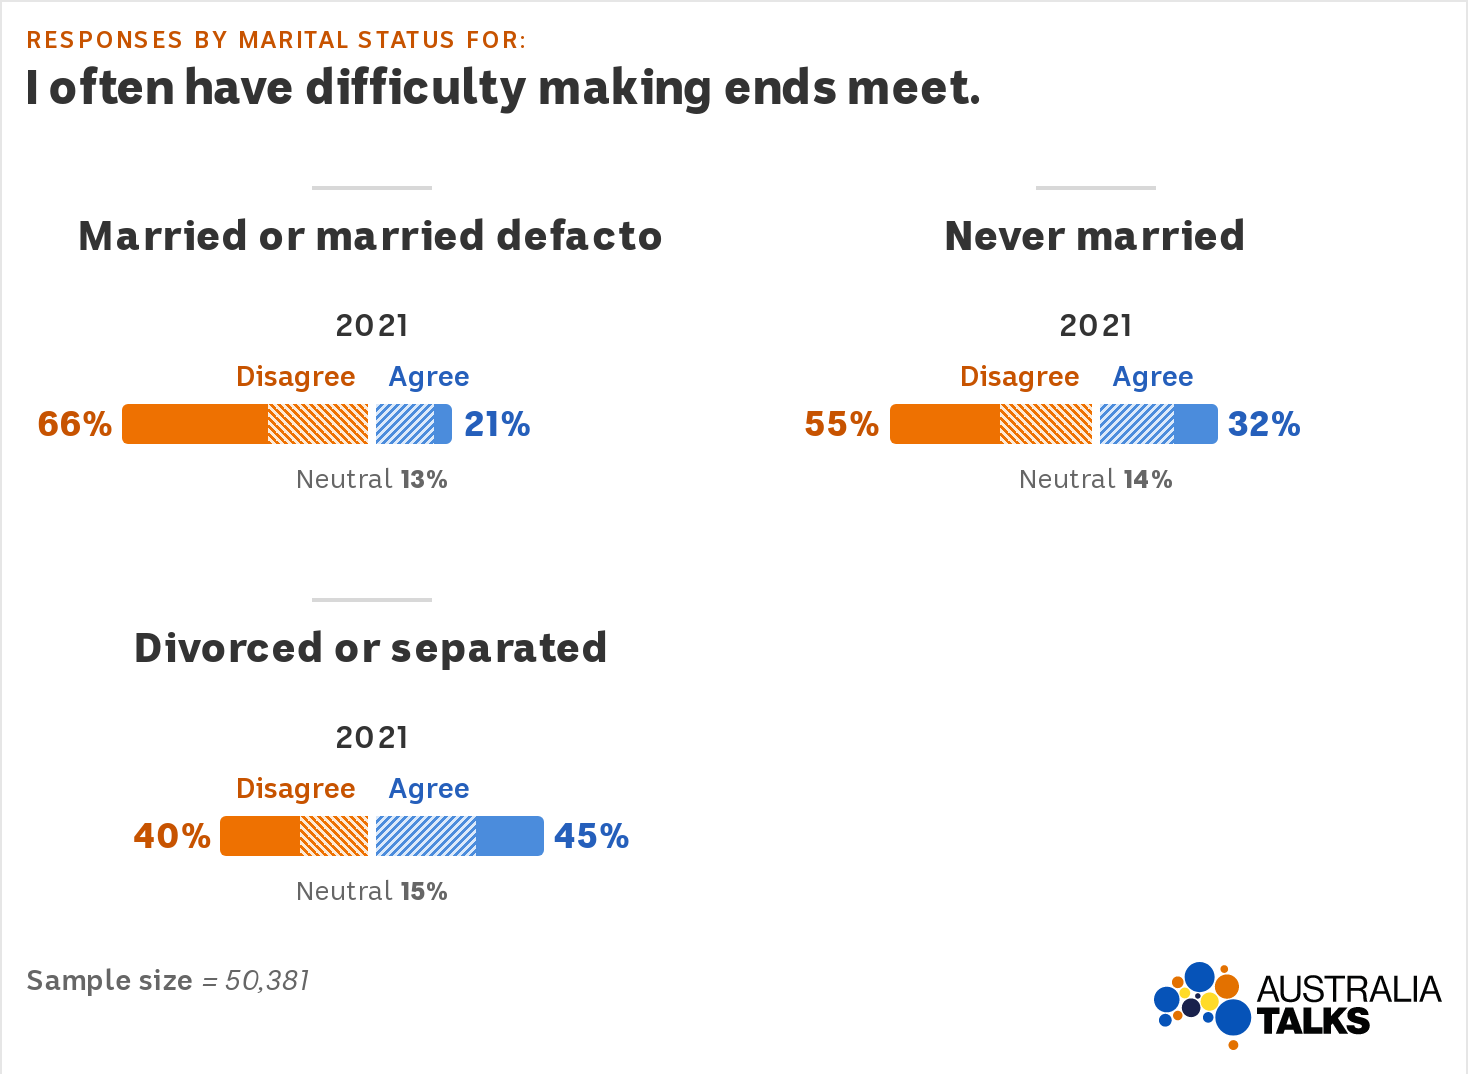 Graph showing divorced or separated Australians are more likely to agree they have difficulty making ends meet.